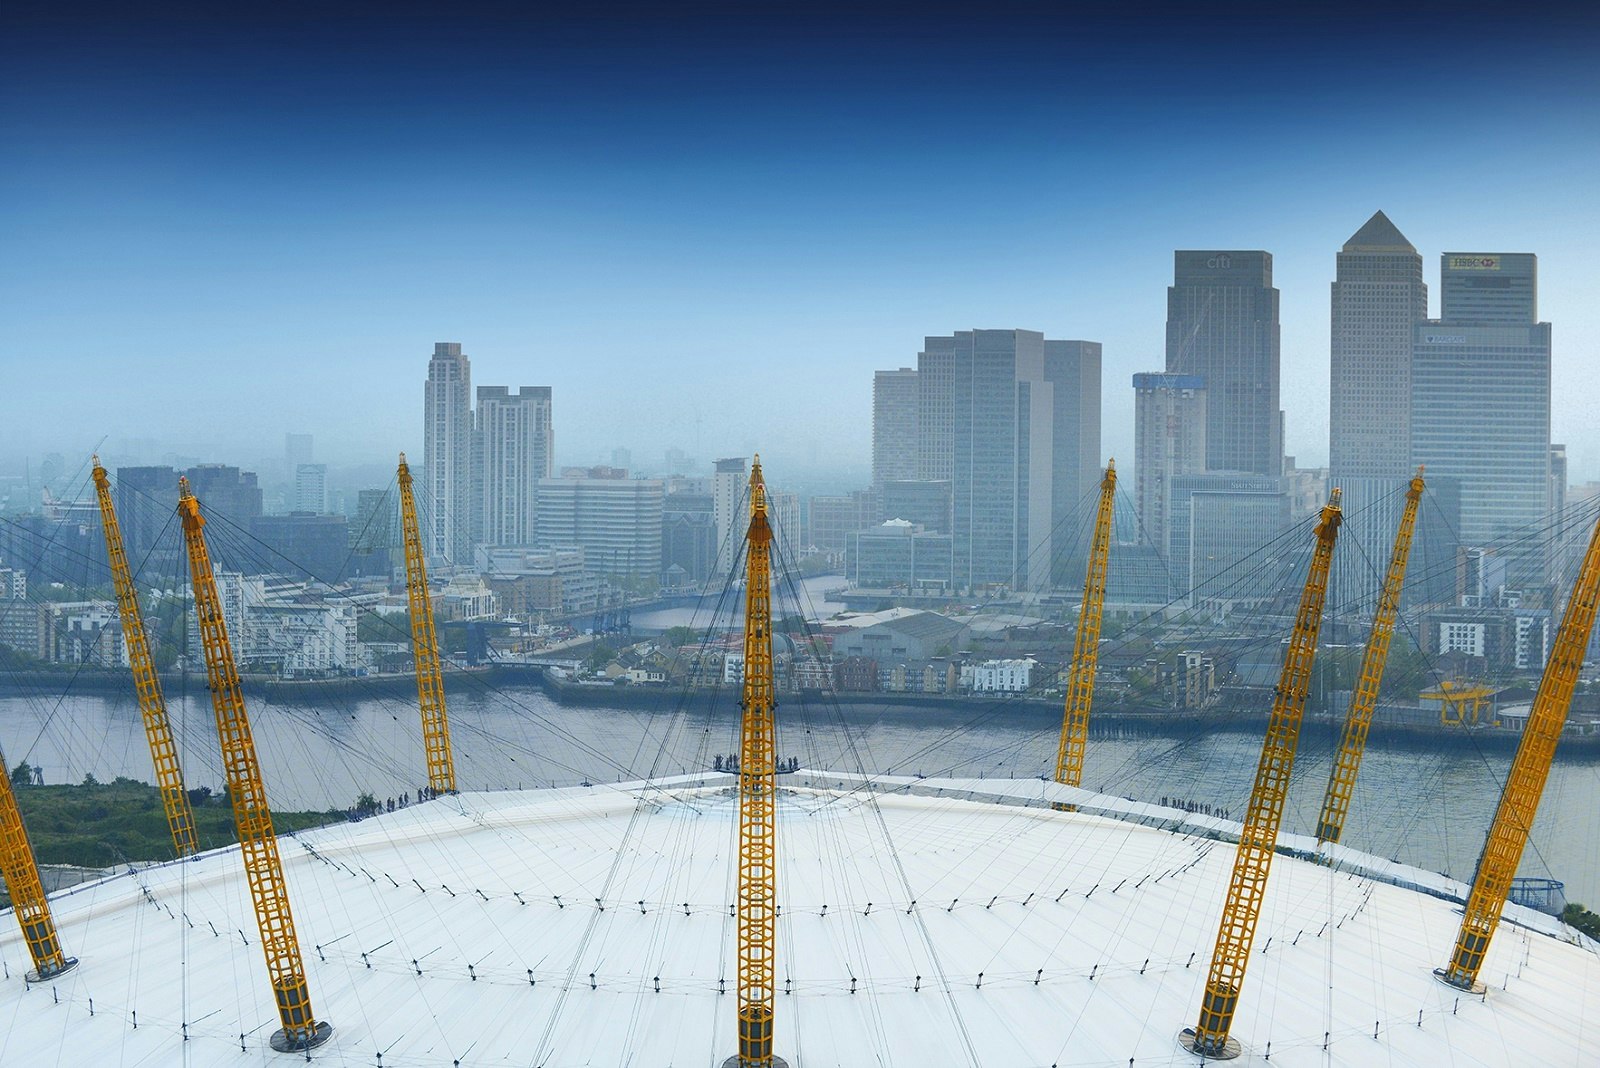 Up at The O2 - The Roof of The O2 image 4